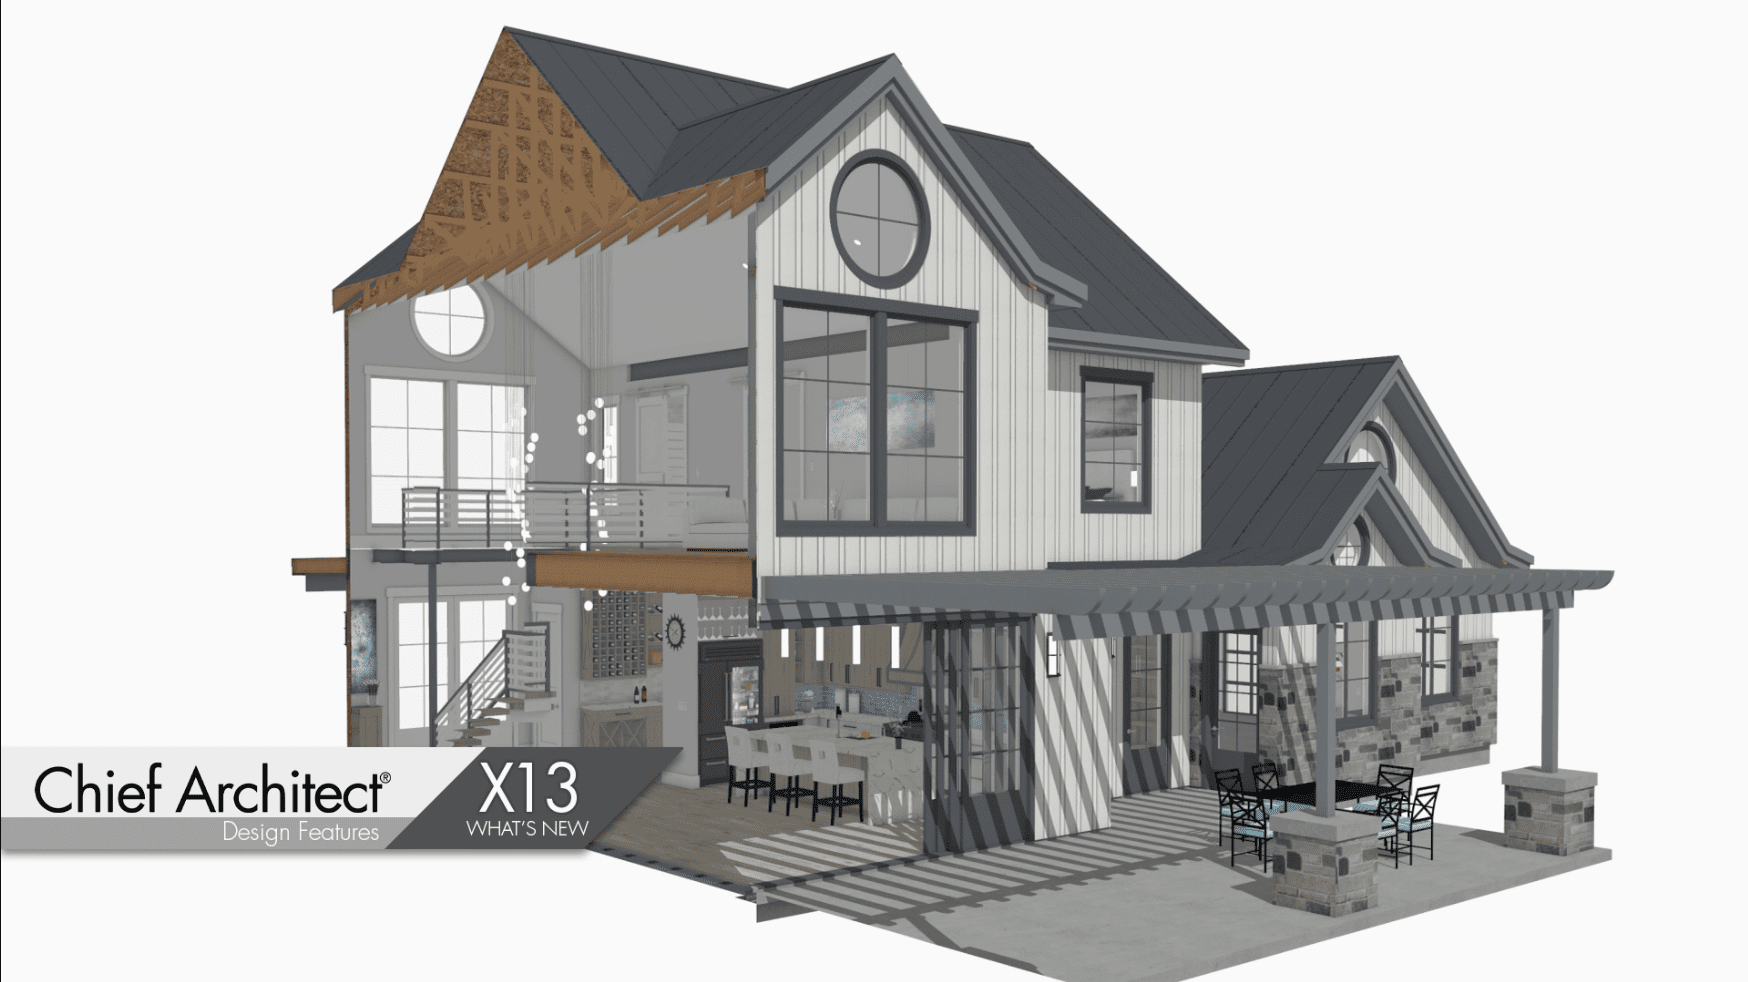 3D model of a house with porch and stairs designed using Chief Architect Interiors X14 software